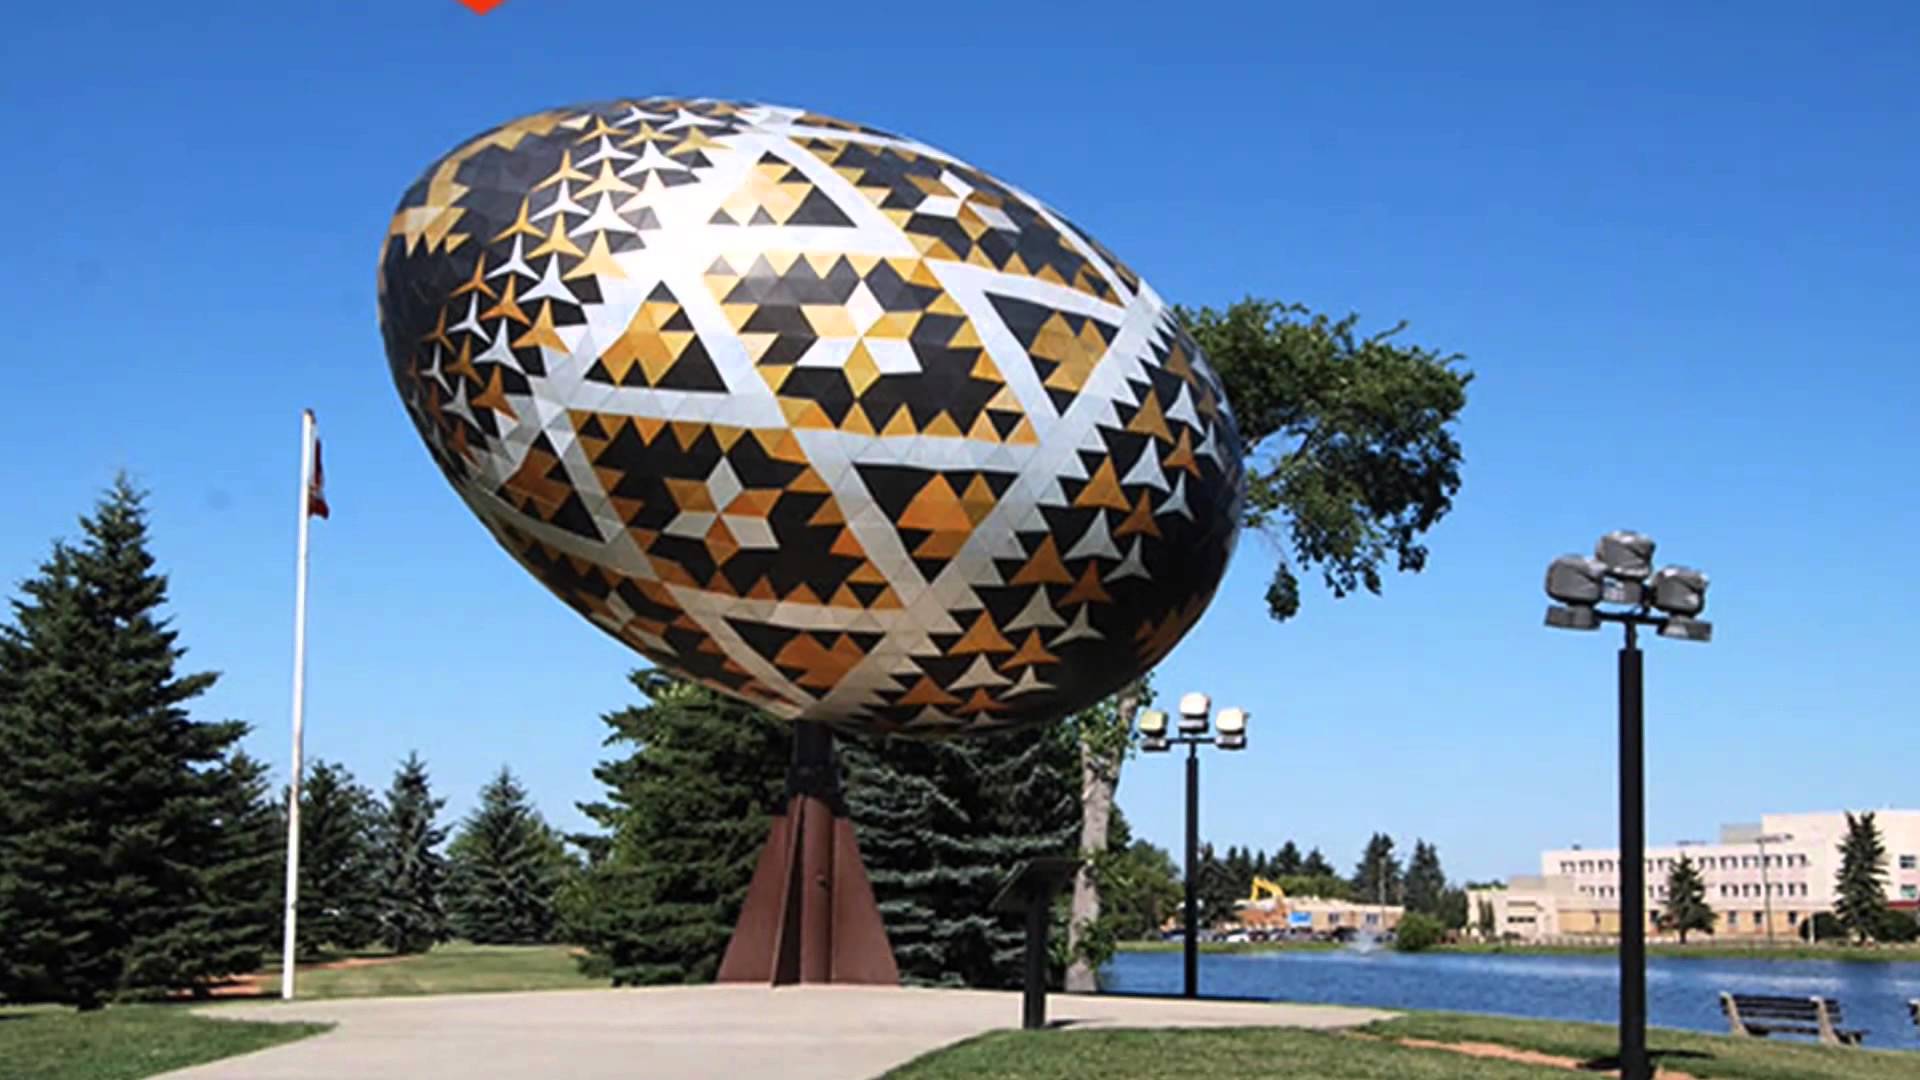 Top Postcard-Worthy Weird Roadside Attractions to See in 